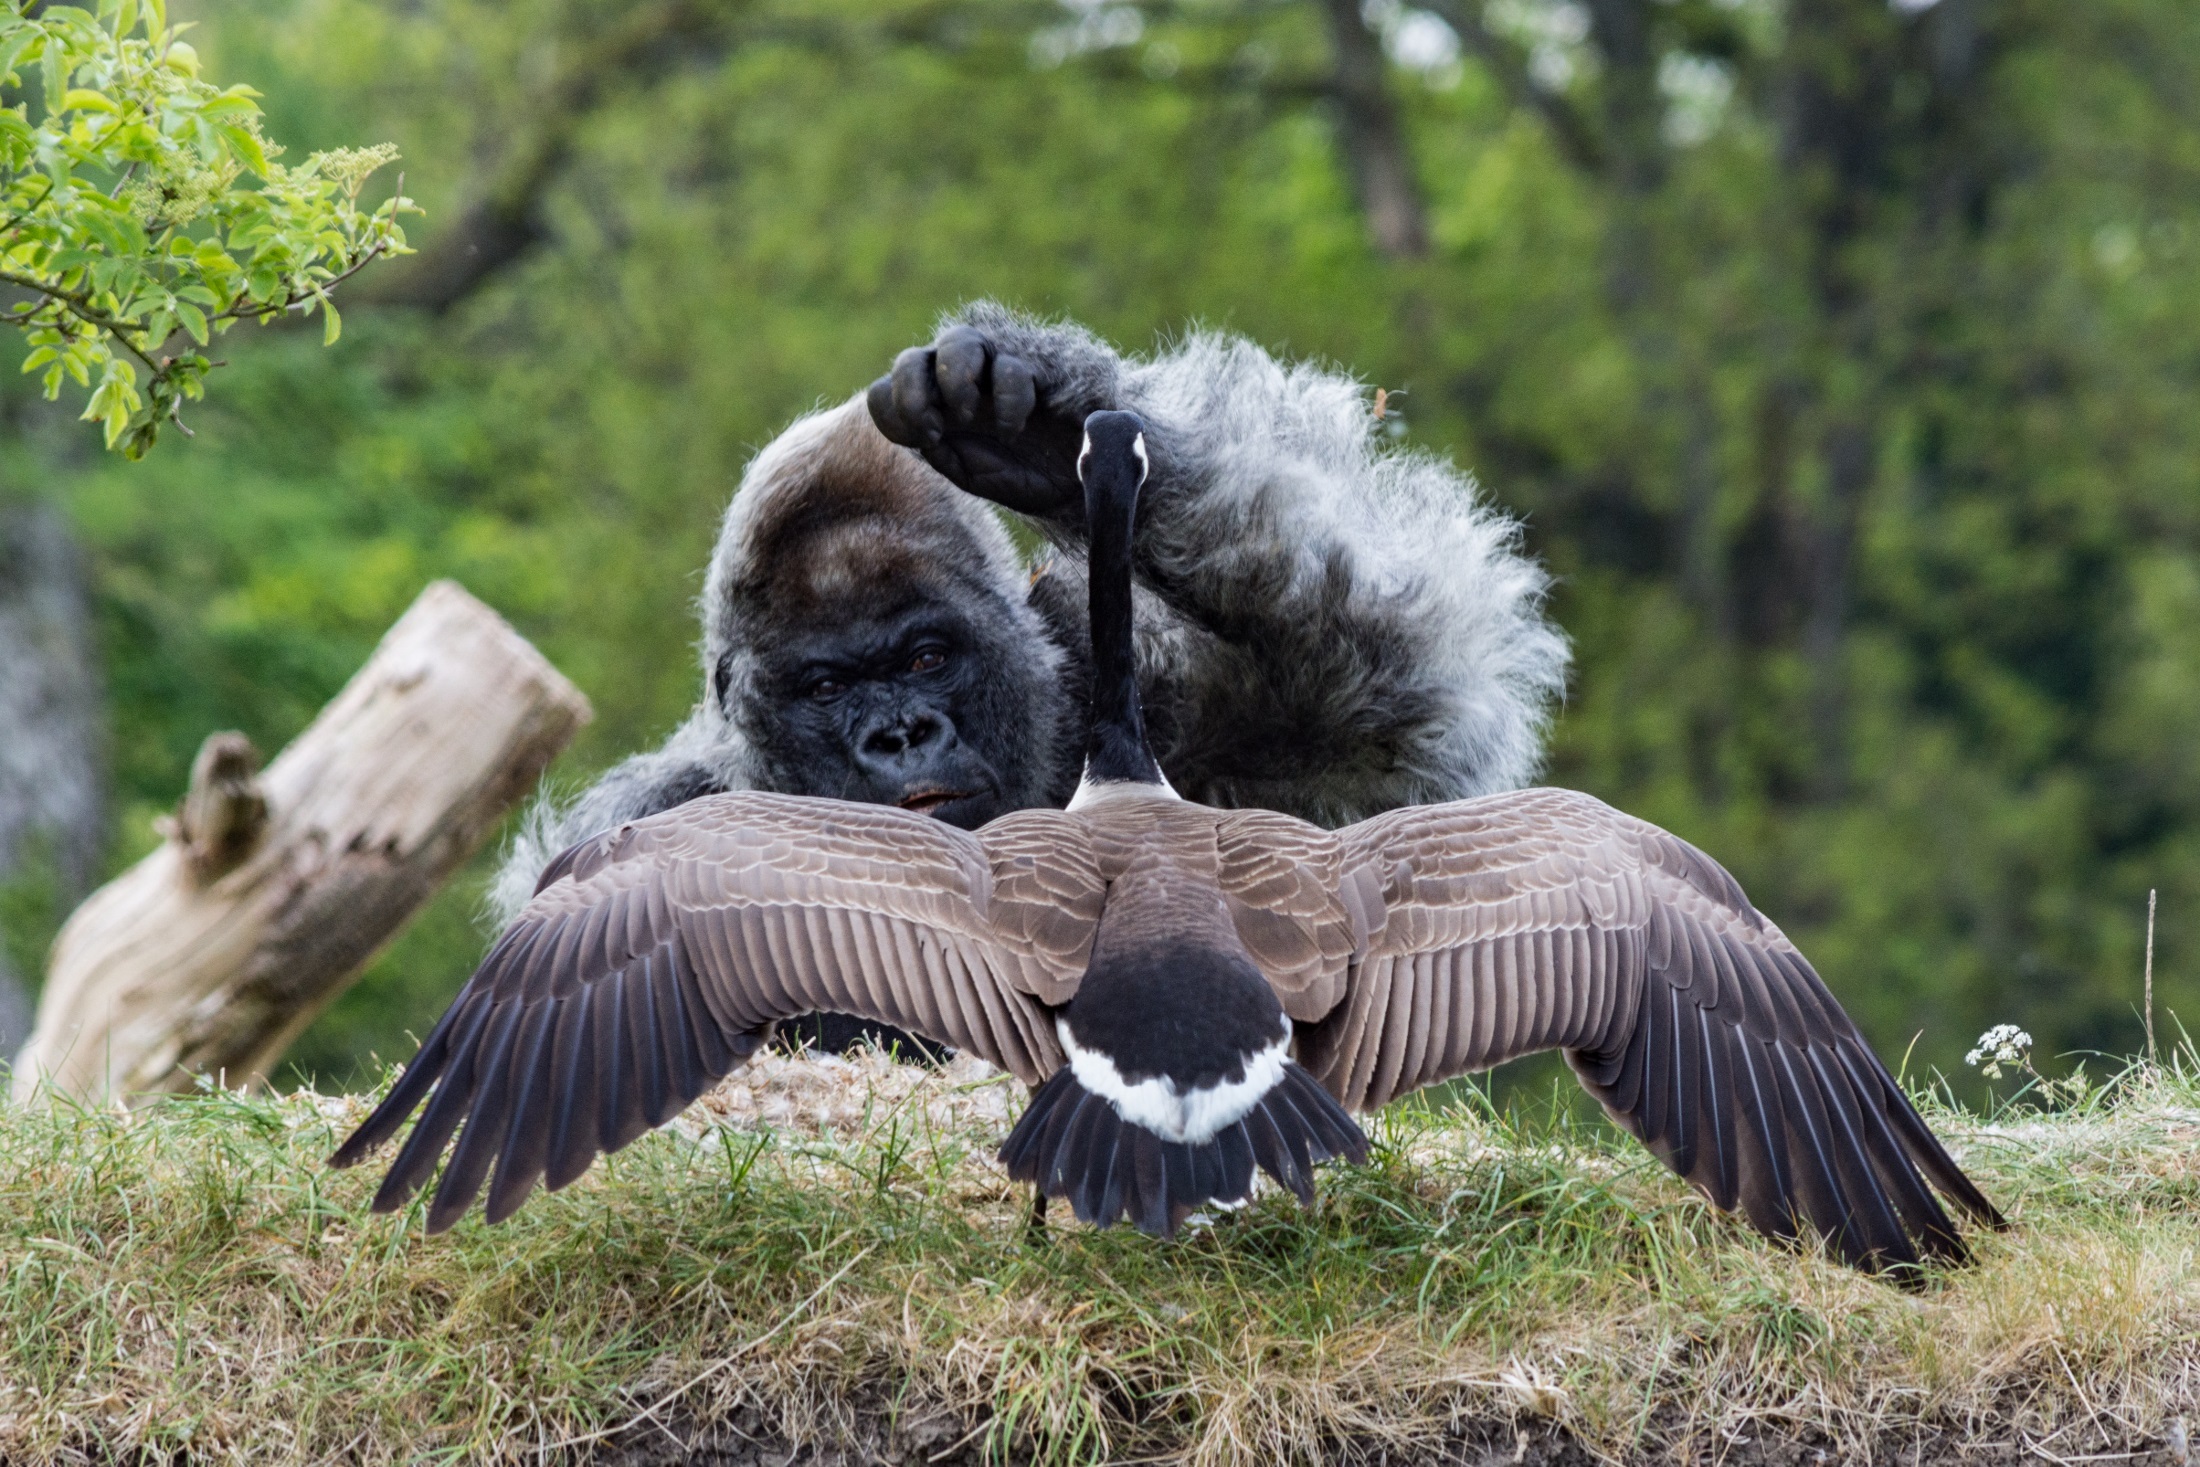 Amateur photographer captures moment Nico the gorilla fights off geese - Wiltshire Times